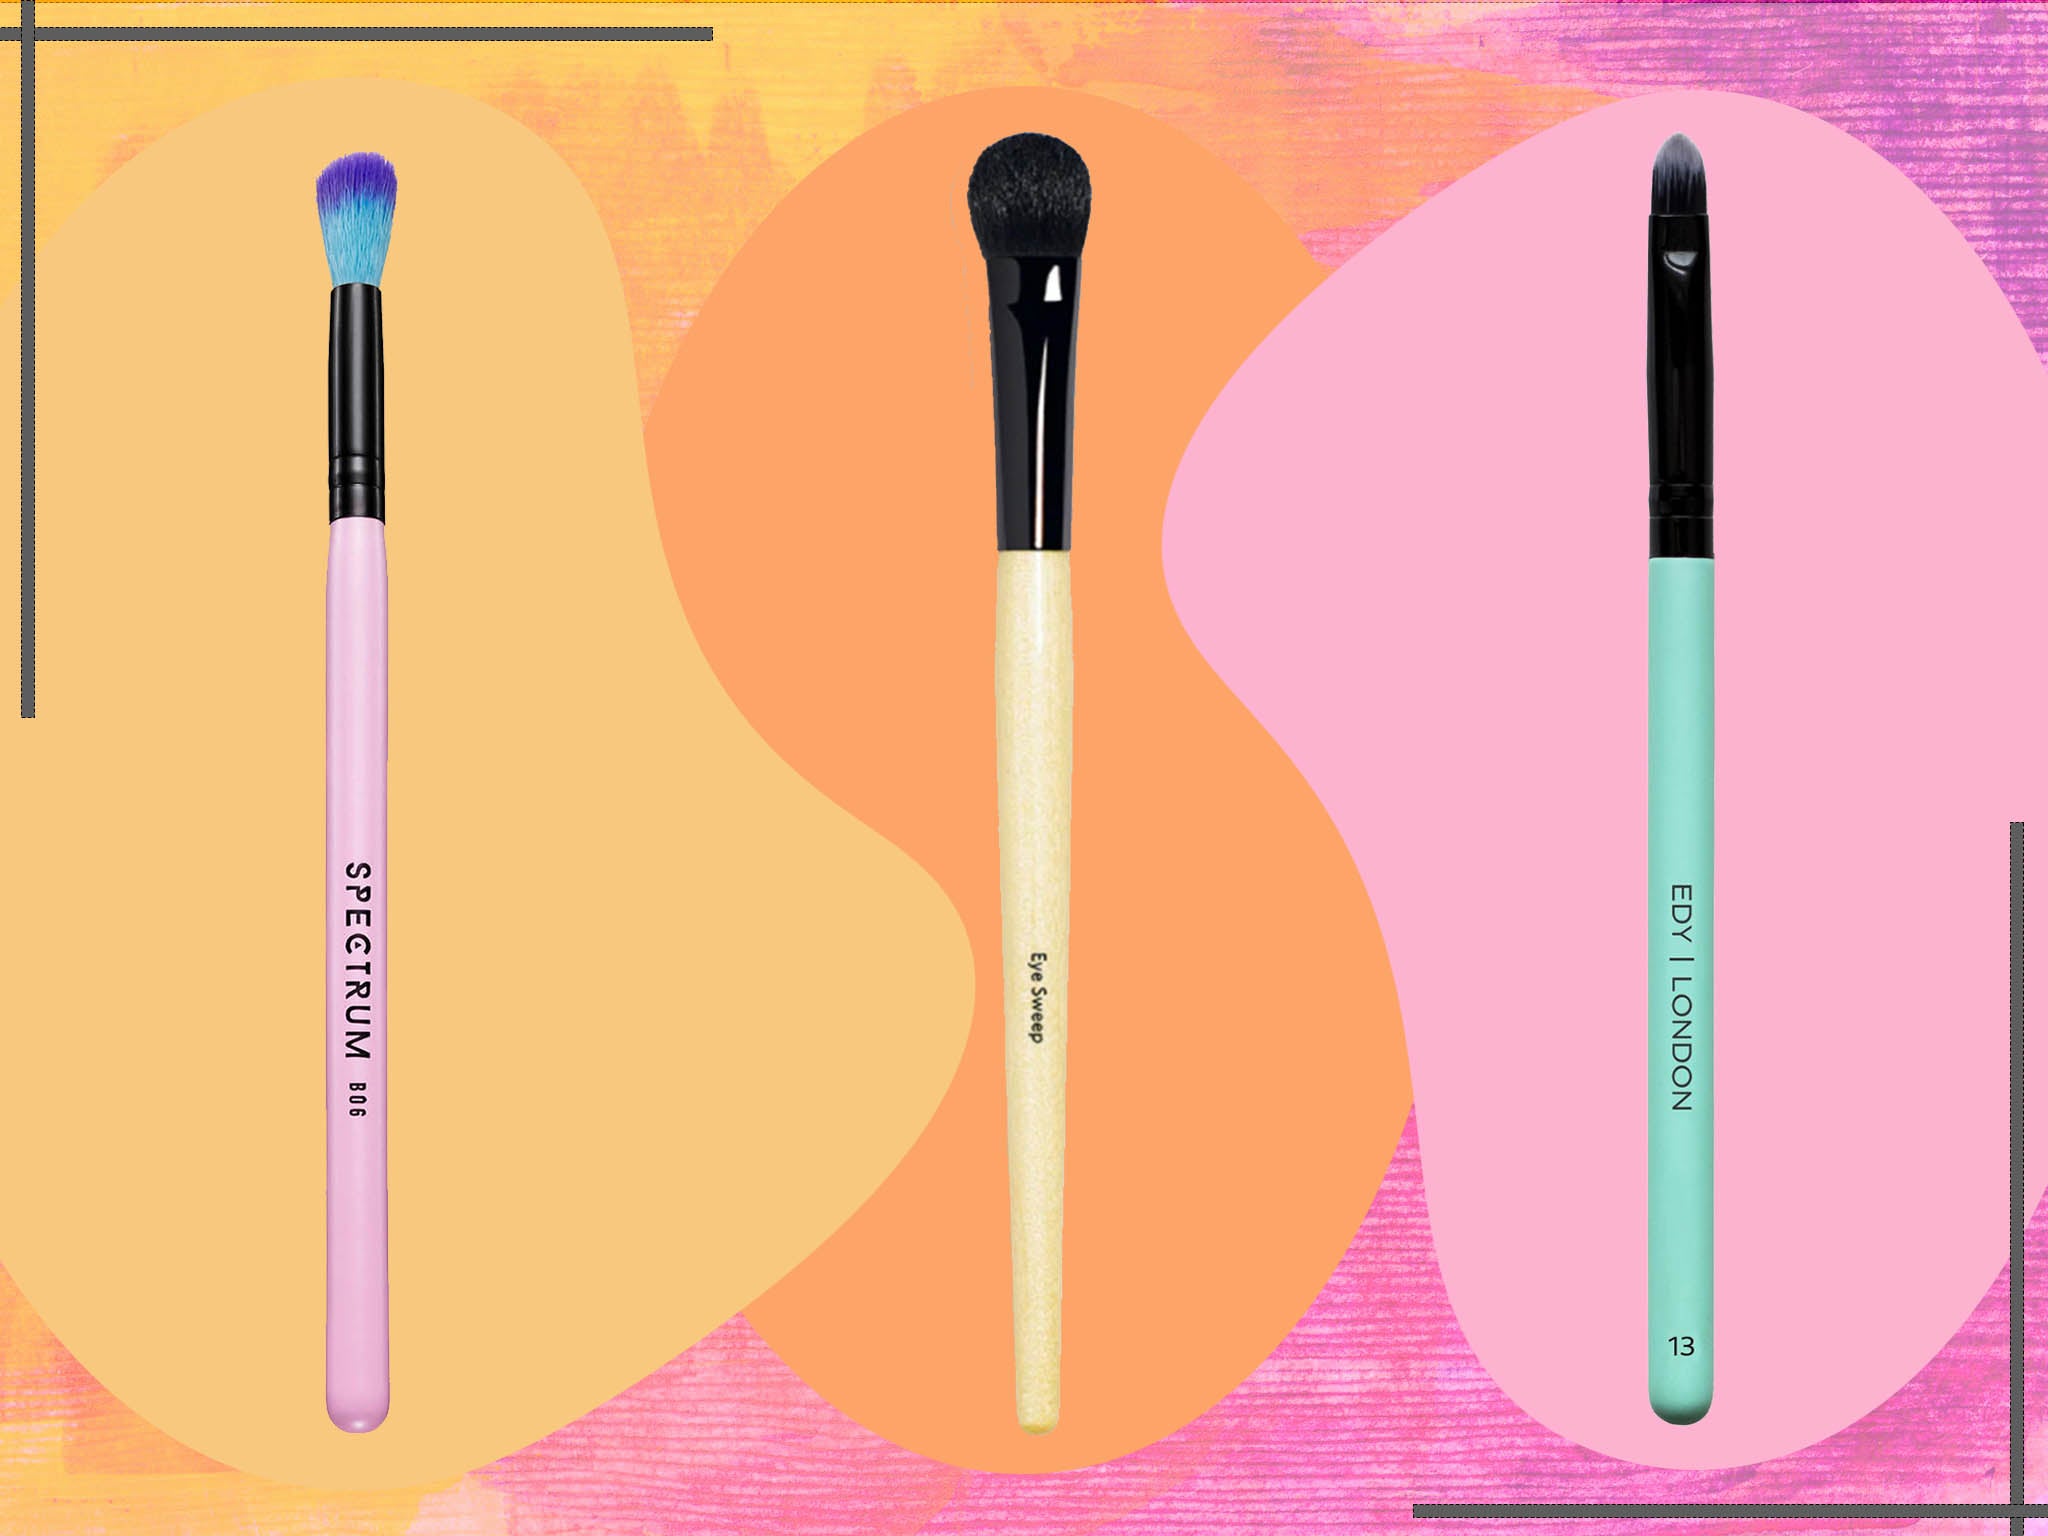 Whether you’re keen to go big and bold with a graphic liner or keep things natural there’s a brush for your preferred look